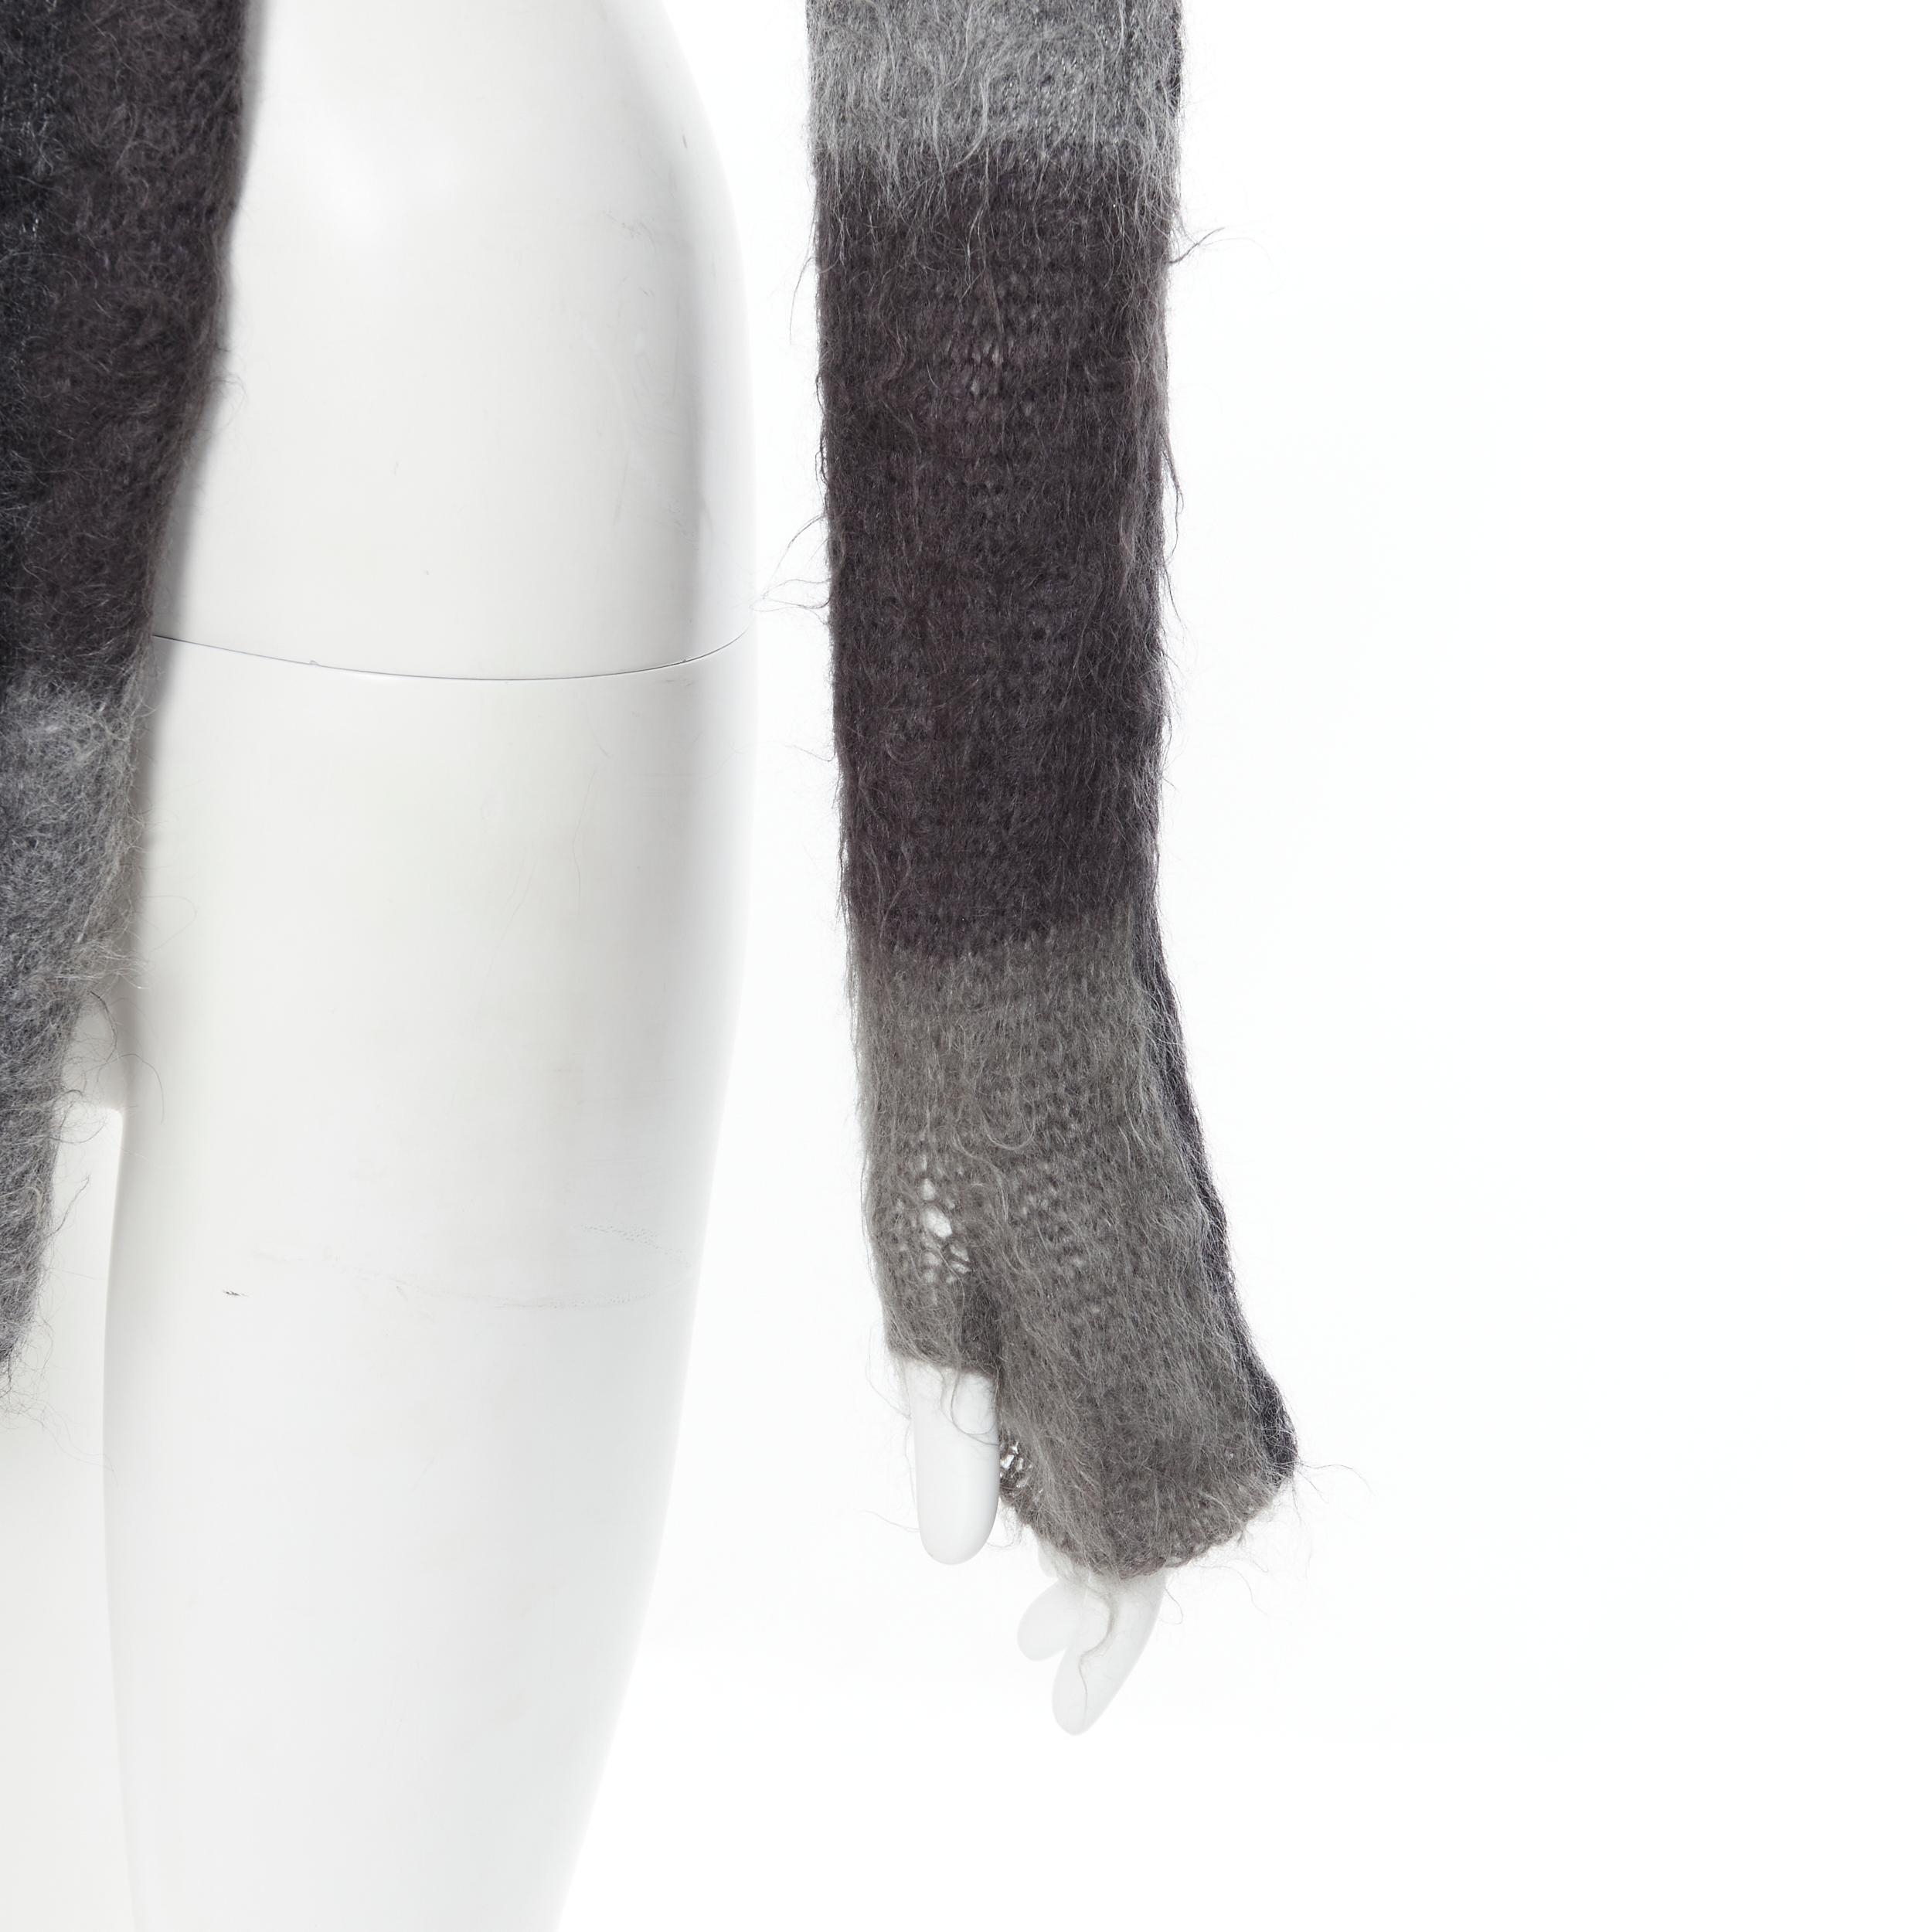 UNDERCOVER grey black check wool knit fingerless glove extra long scarf 
Reference: CAWG/A00174 
Brand: Undercover 
Material: Wool 
Color: Grey 
Pattern: Check 
Extra Detail: Attached open finger glove scarf. Extra long scarf. 

CONDITION: